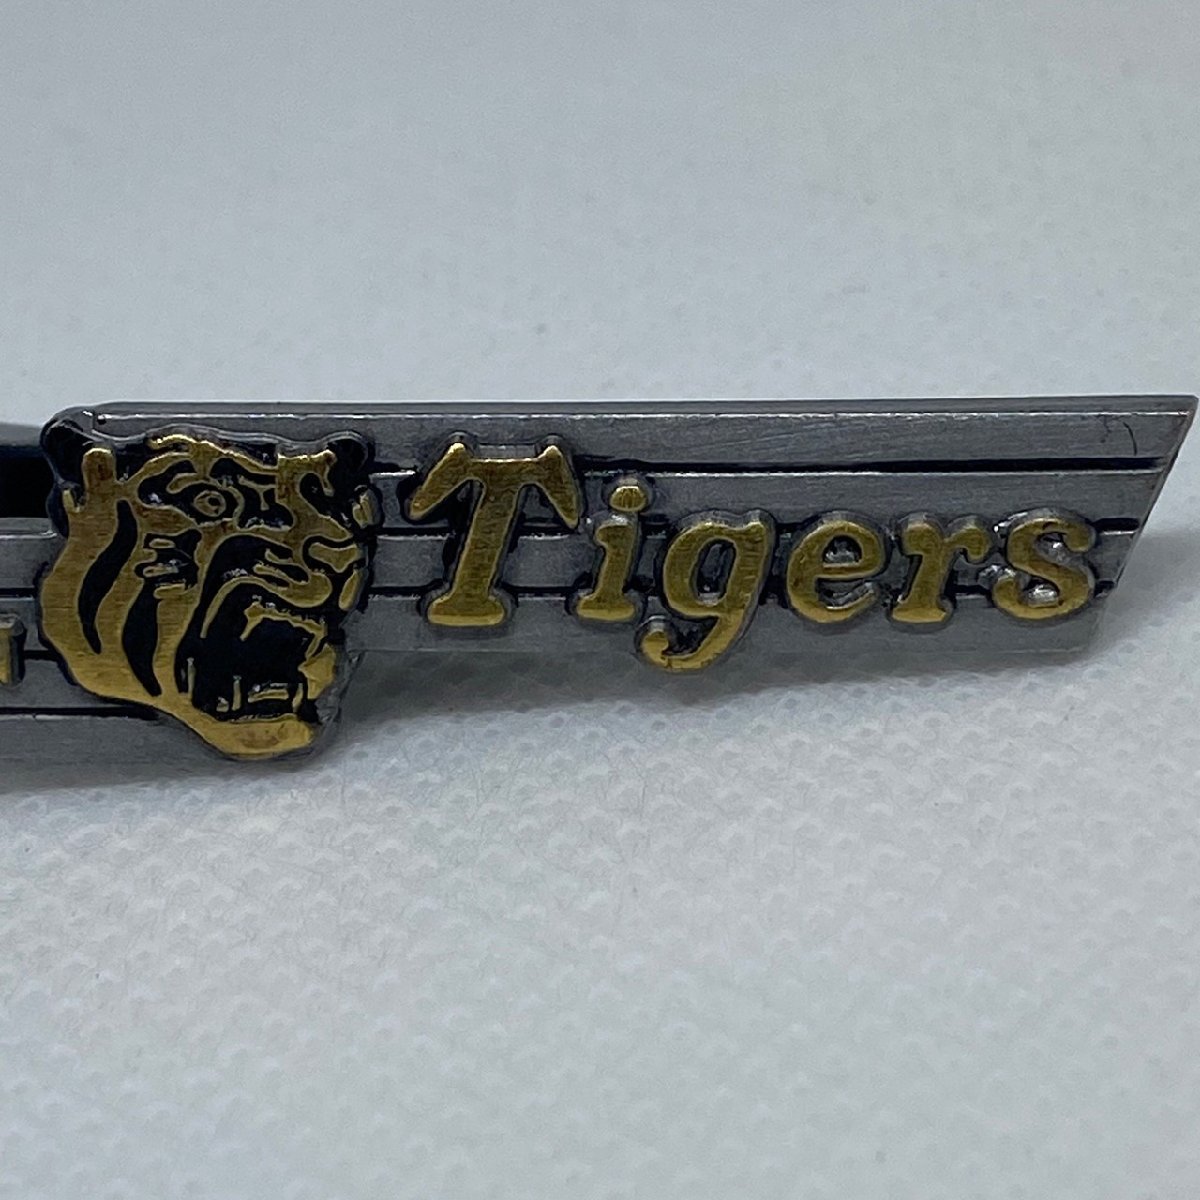 USED Hanshin Tigers necktie pin matted silver color tiepin Thai bar HANSHIN Tigers men's suit new go in company member company *84 after ..